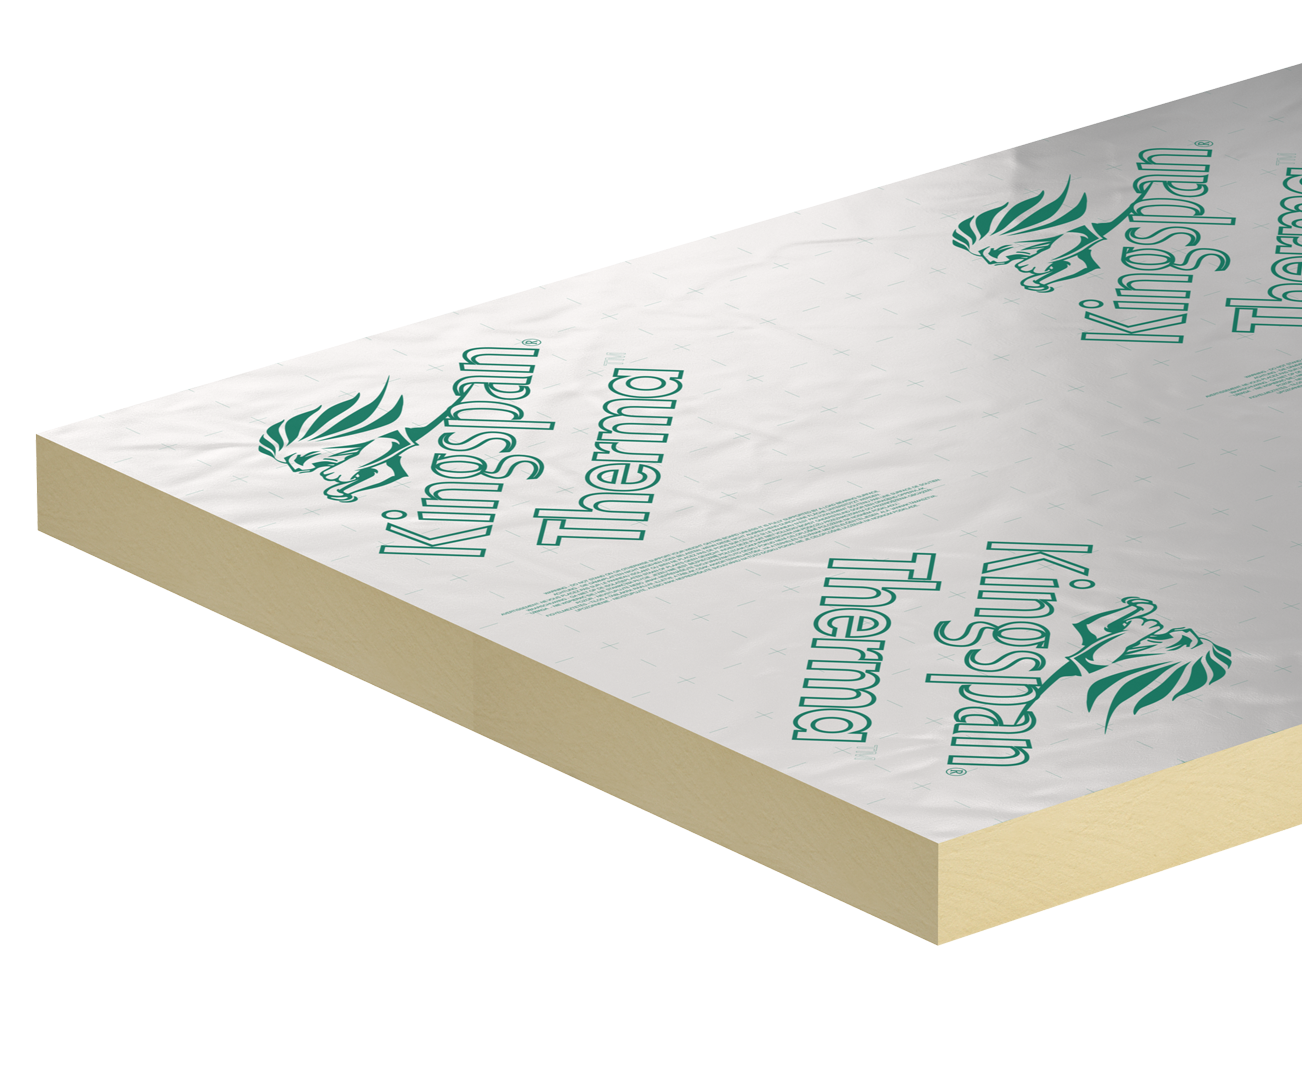 Kingspan ThermaFloor TF70 Insulation Board - 2400mm x 1200mm x 70mm (pack of 4 sheets 11.52m2)